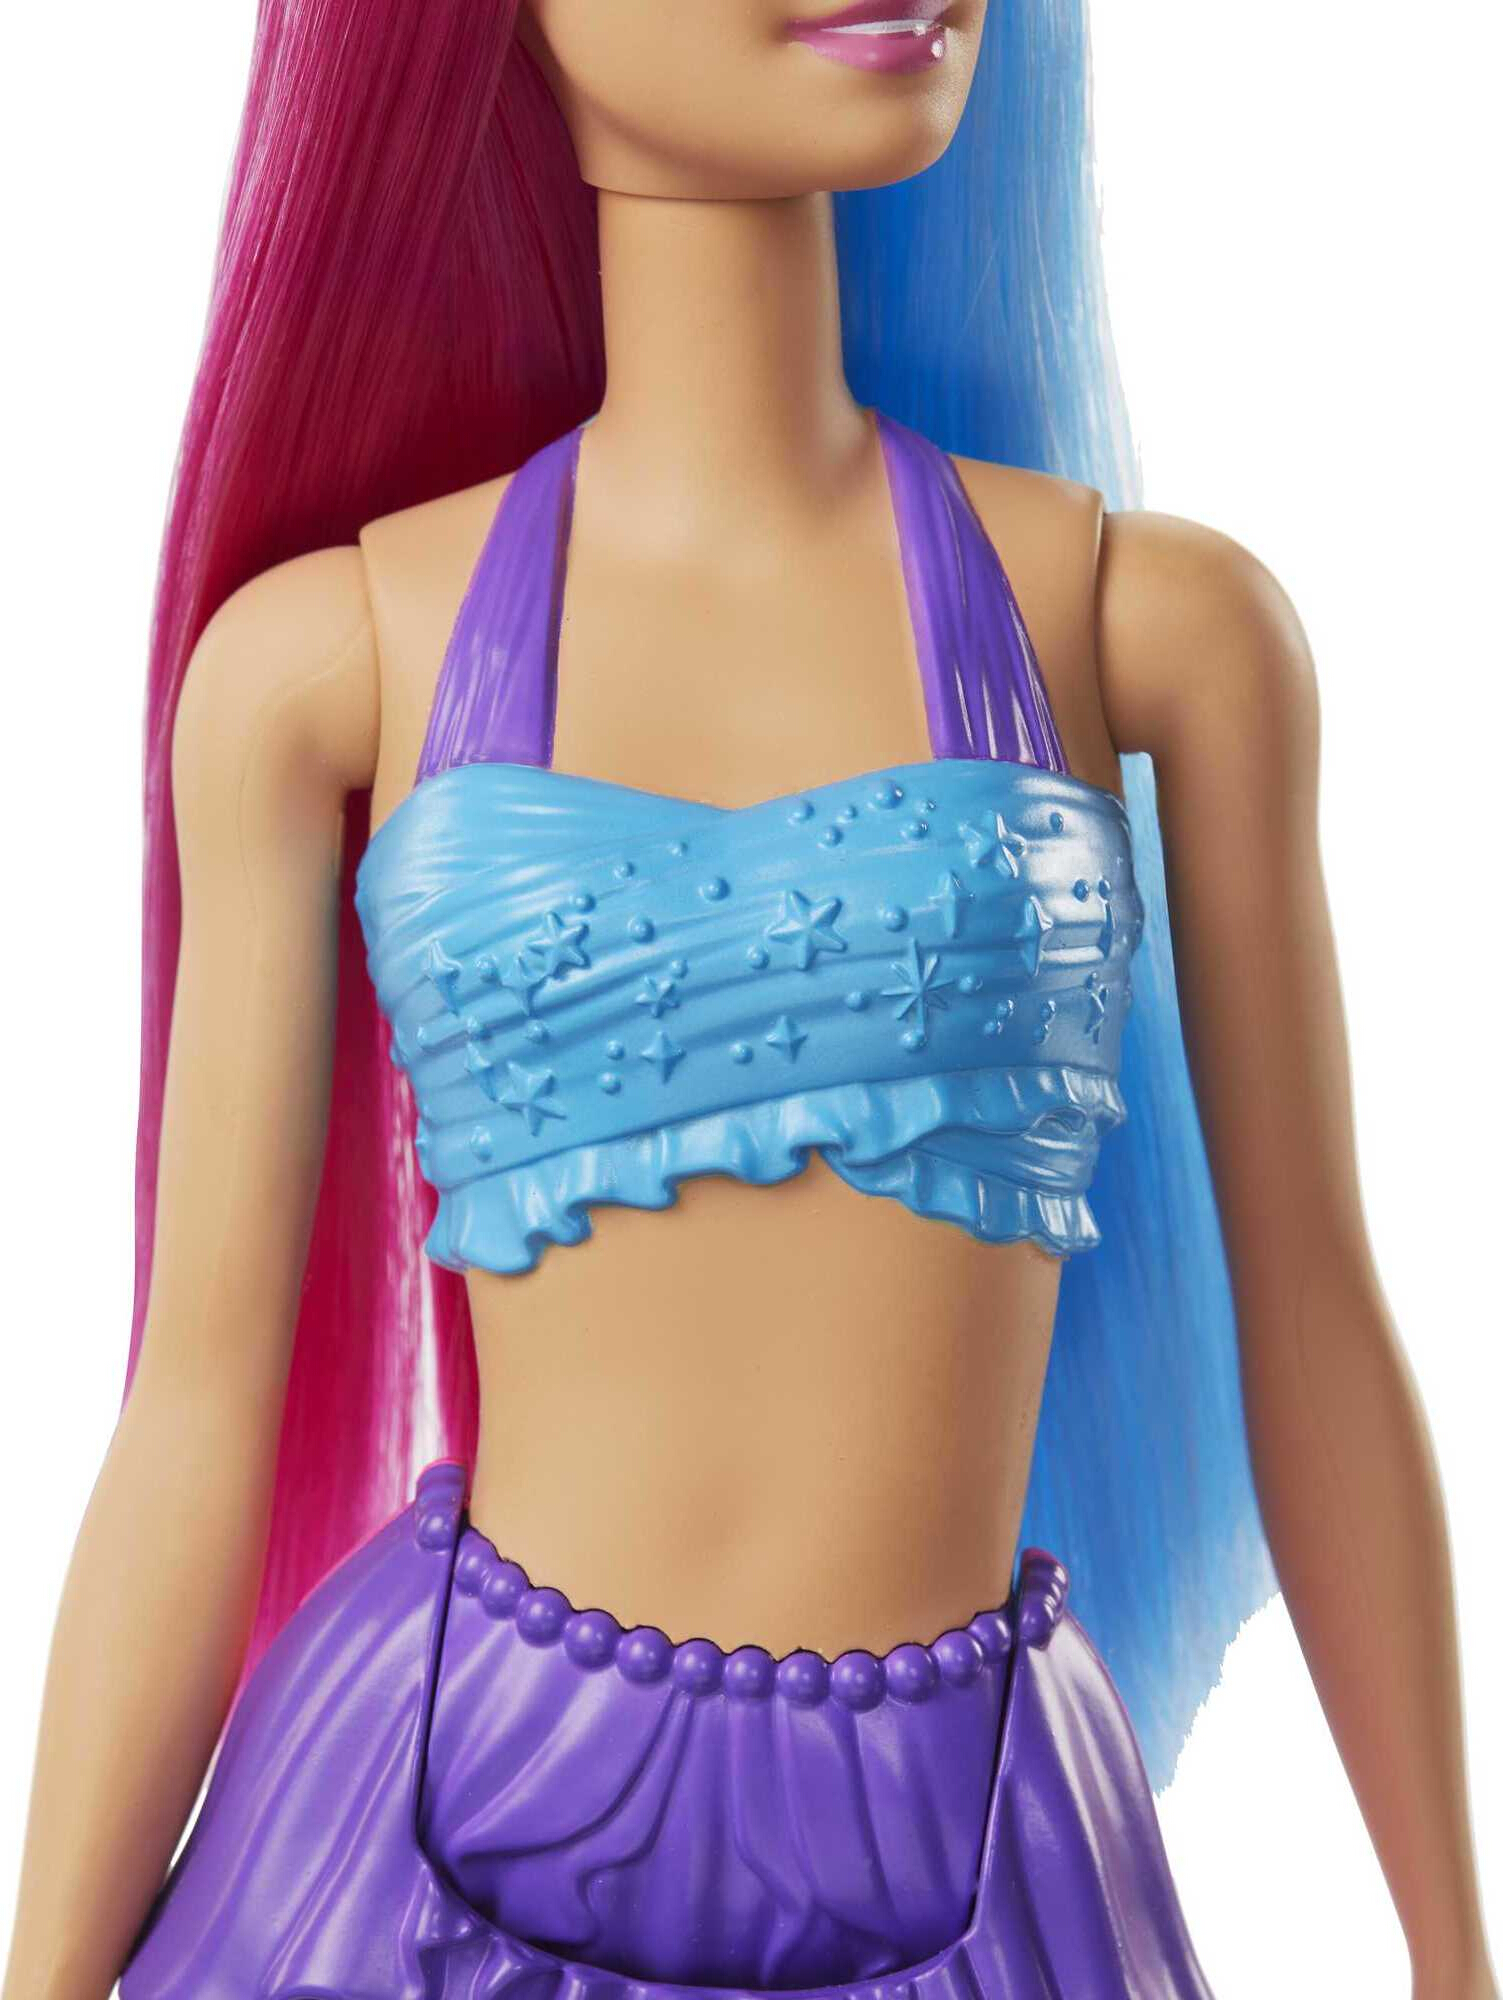 Barbie Dreamtopia Mermaid Doll with Pink & Blue Hair & Tail, Plus Tiara Accessory - image 3 of 6